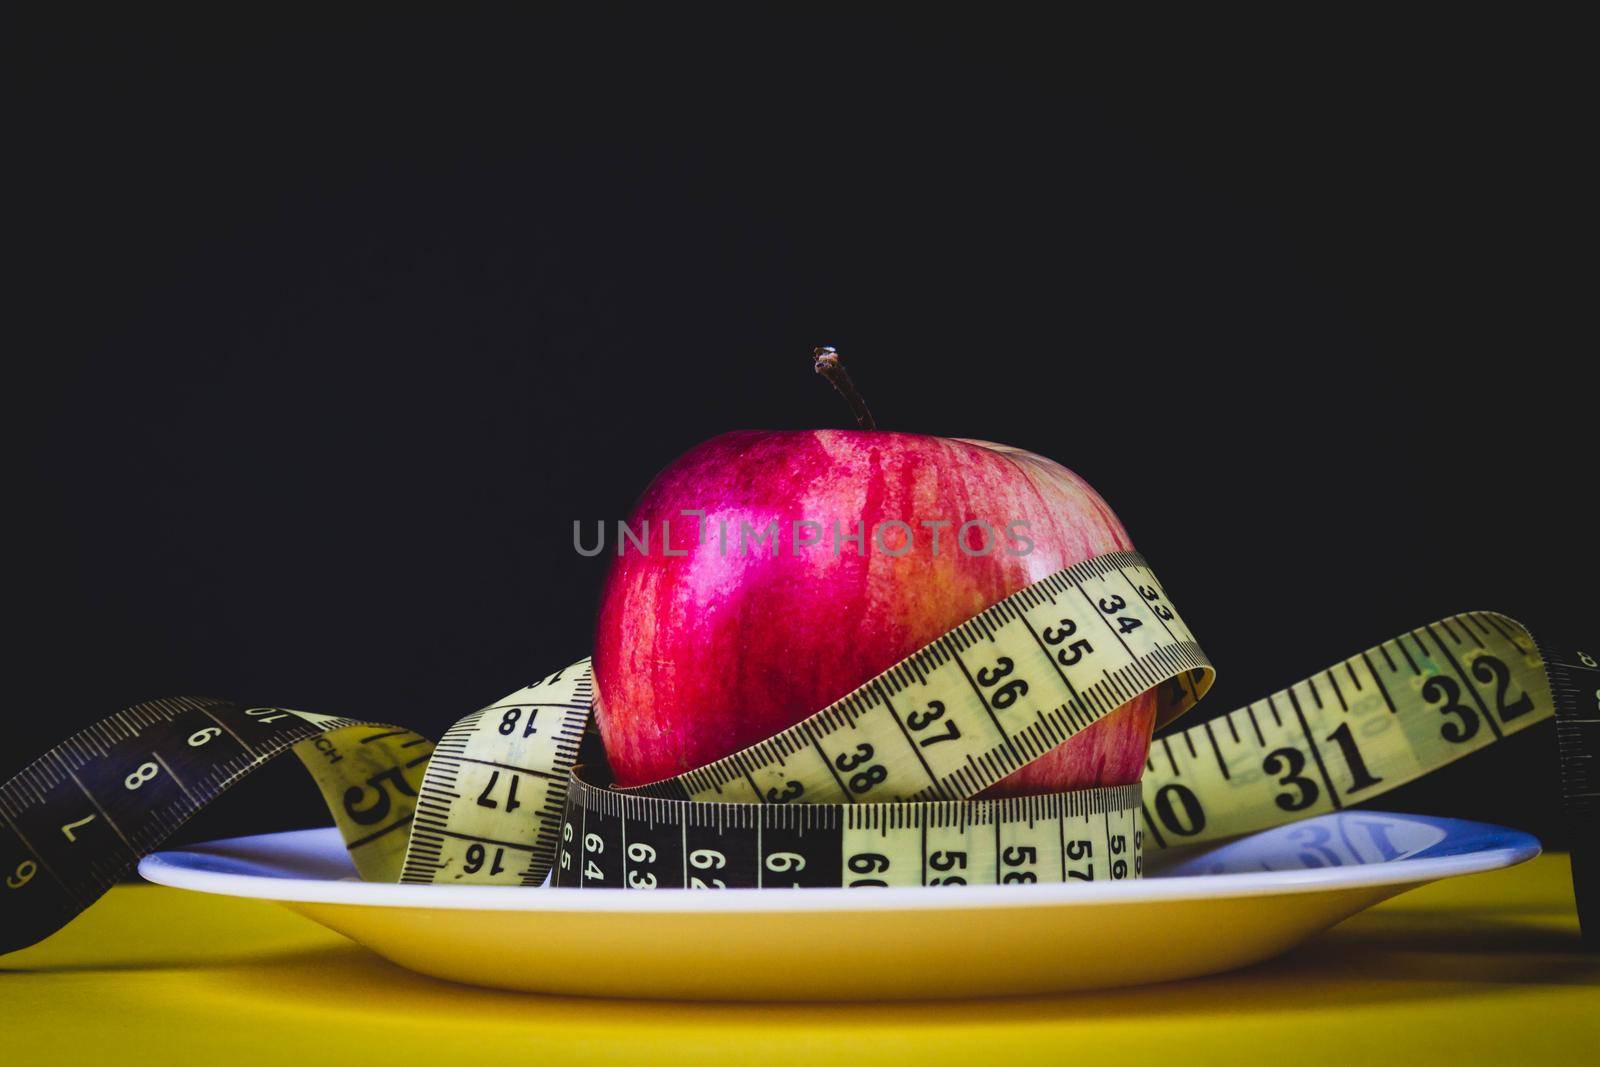 Apple as a means for weight loss. Obesity problem. Fruit diet. Apple and measuring tape.